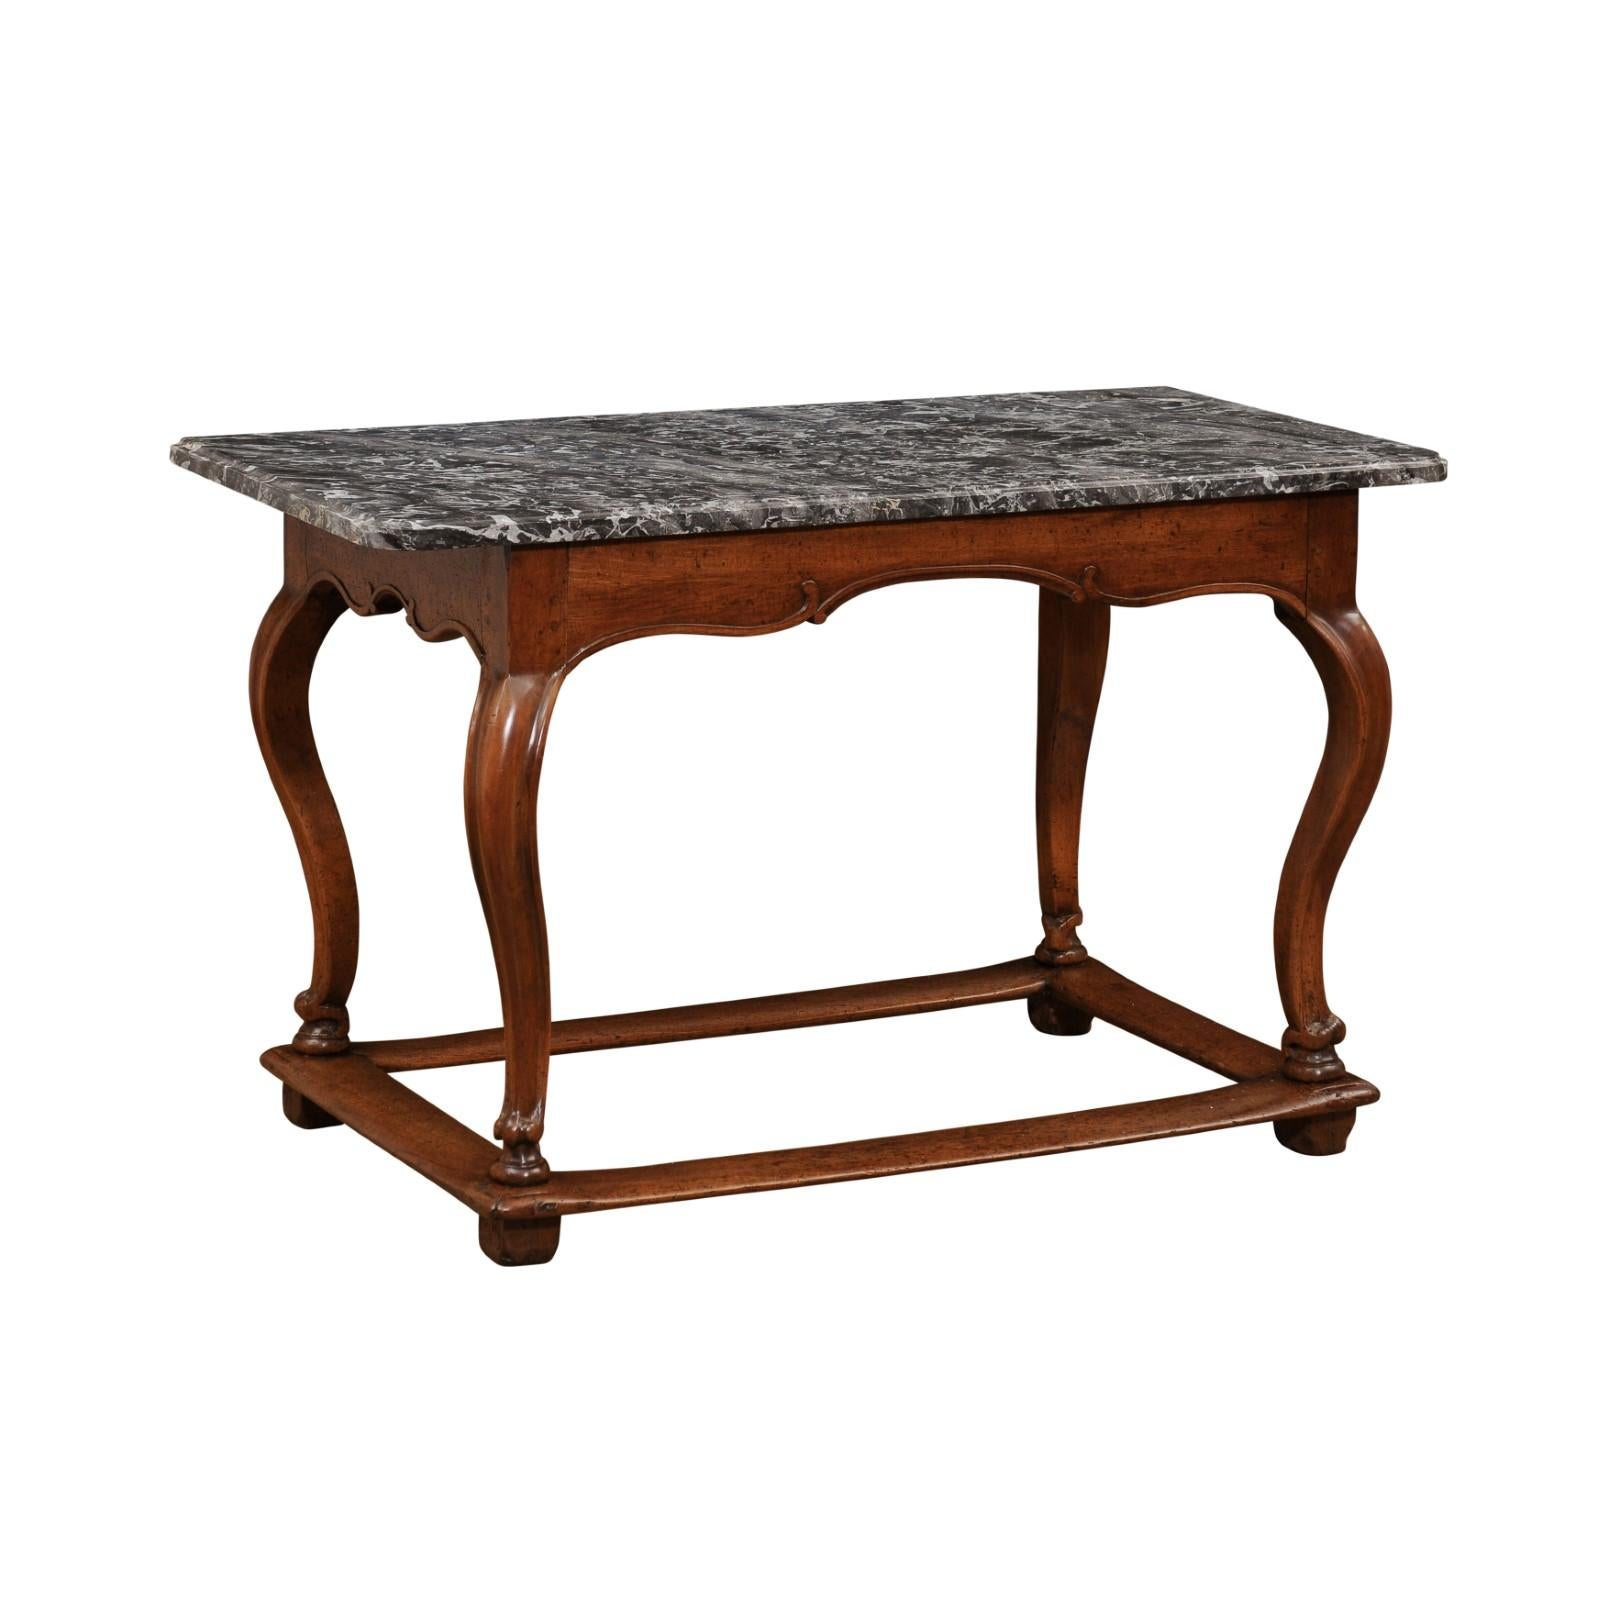 A French Louis XV period walnut center table from the 18th century, with grey marble top, cabriole legs and side stretchers. Created in France during the reign of King Louis XV nicknamed the Bien-Aimé (the Beloved), this center table features a